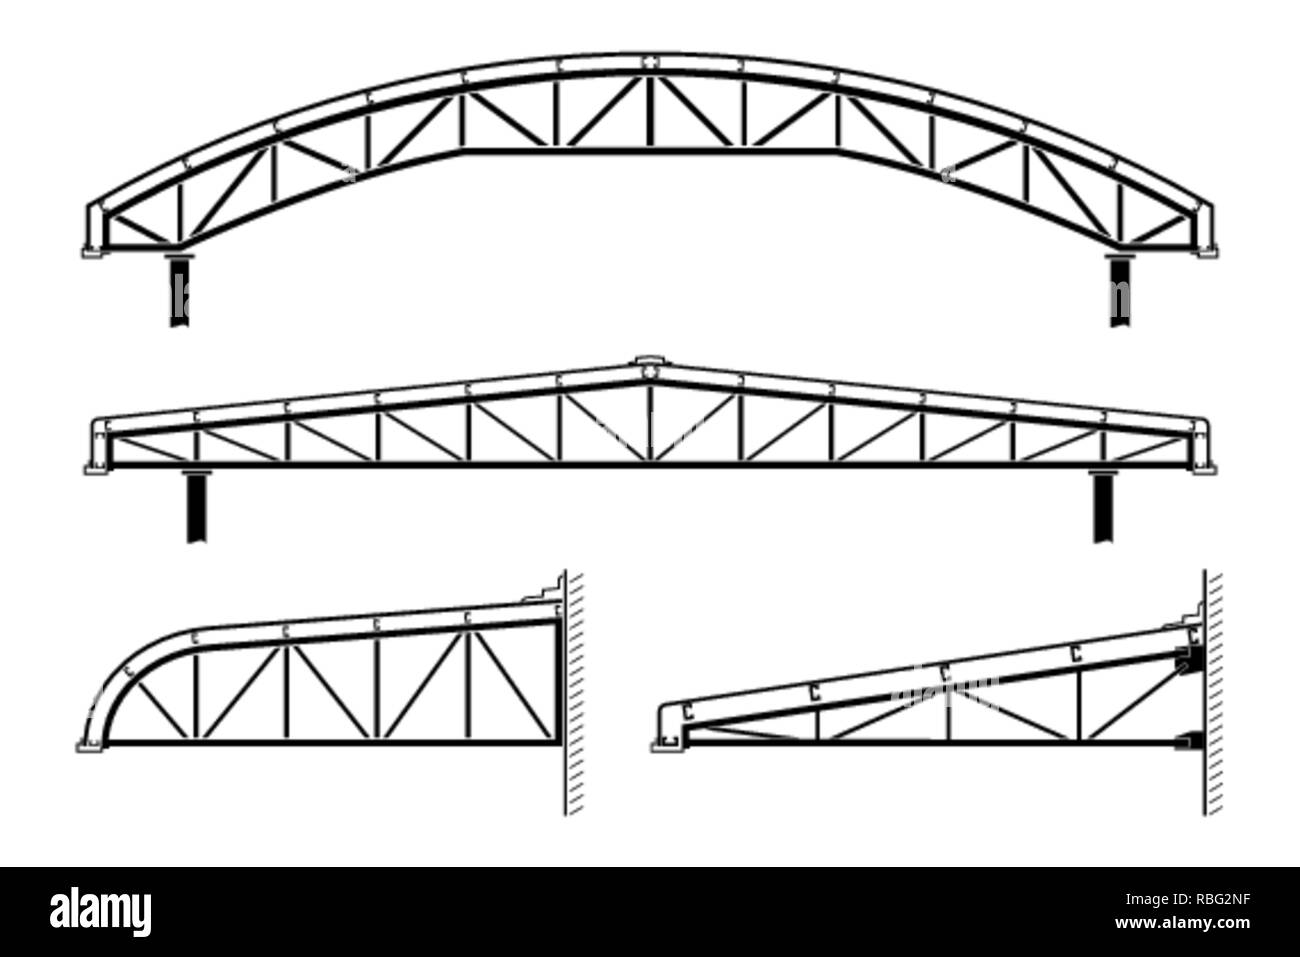 How to draw a fabrication weld drawing of a truss  Quora